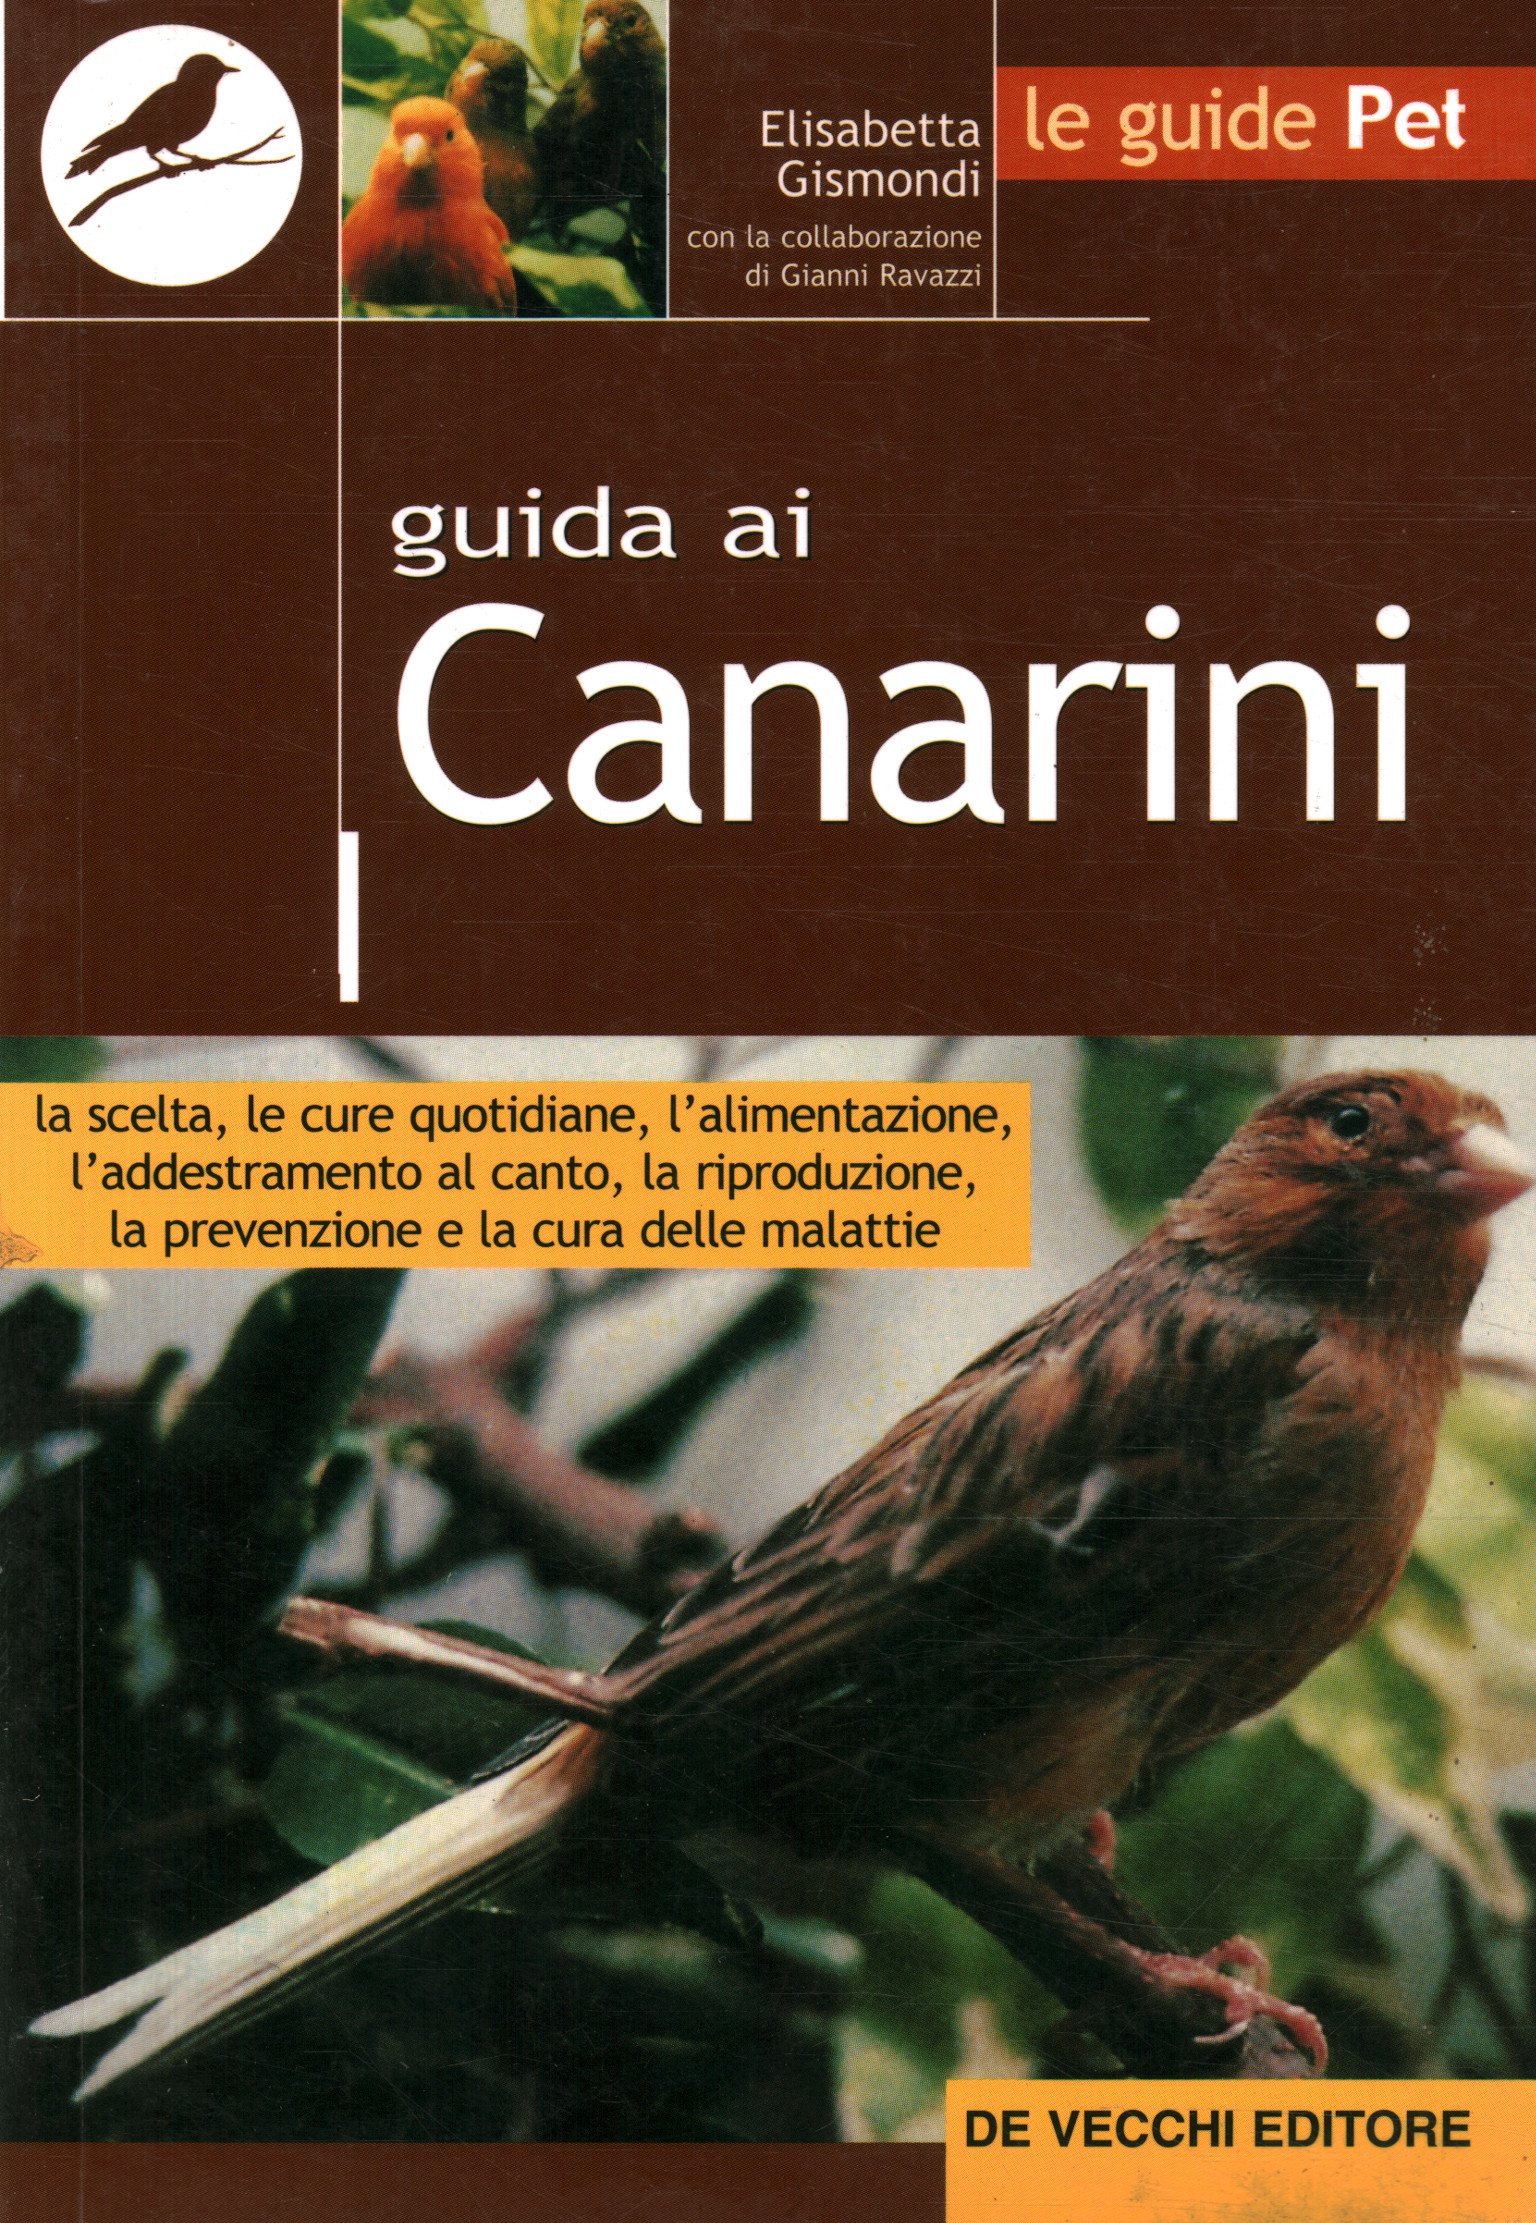 Guide to canaries